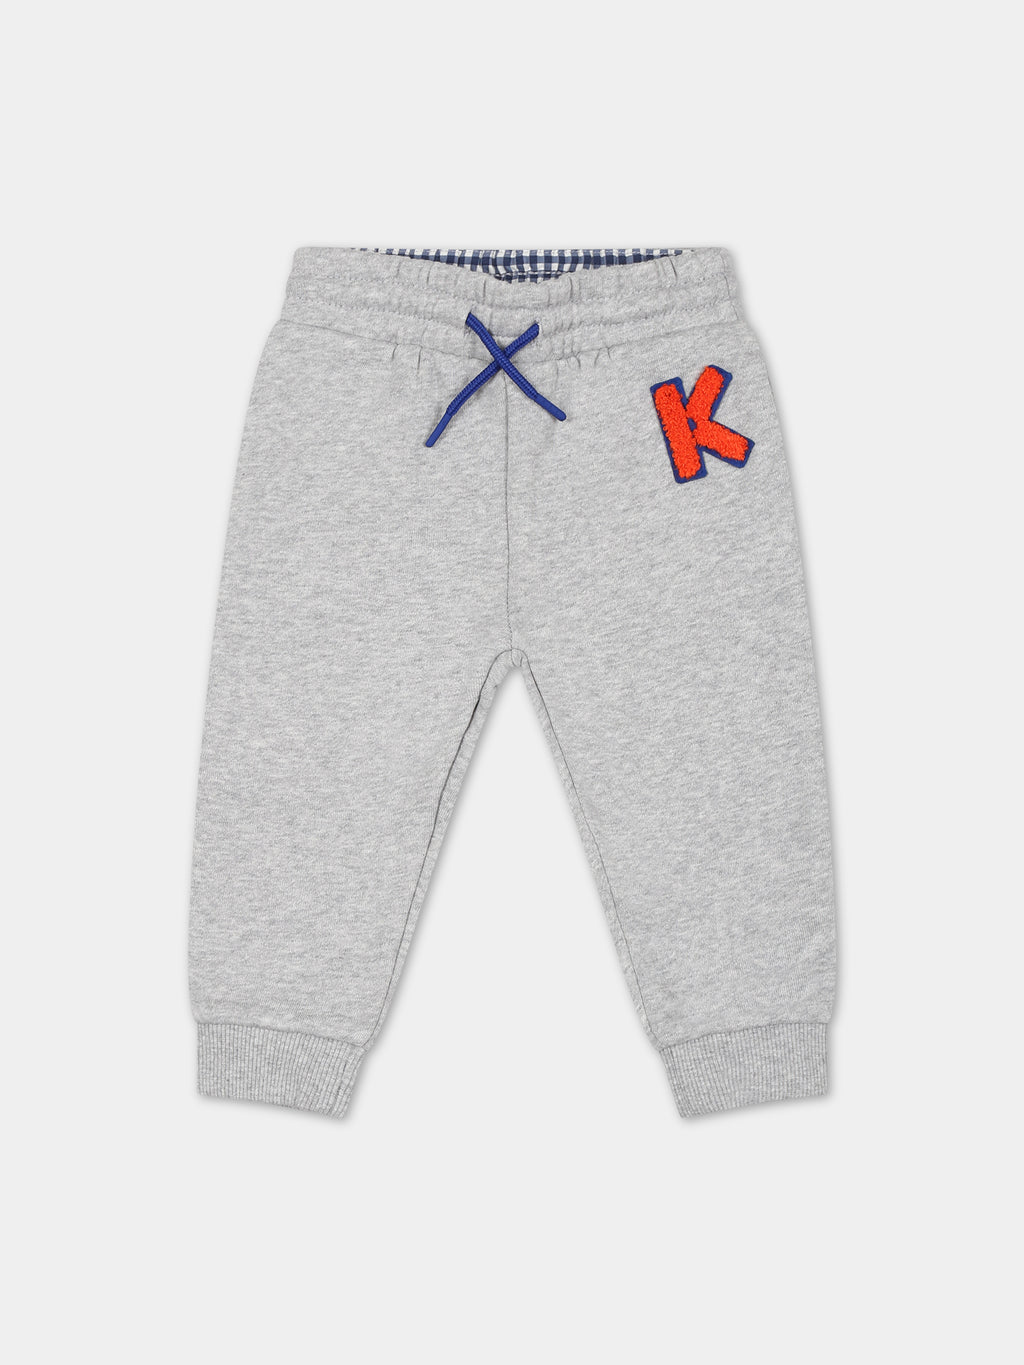 Grey trousers for baby boy with logo